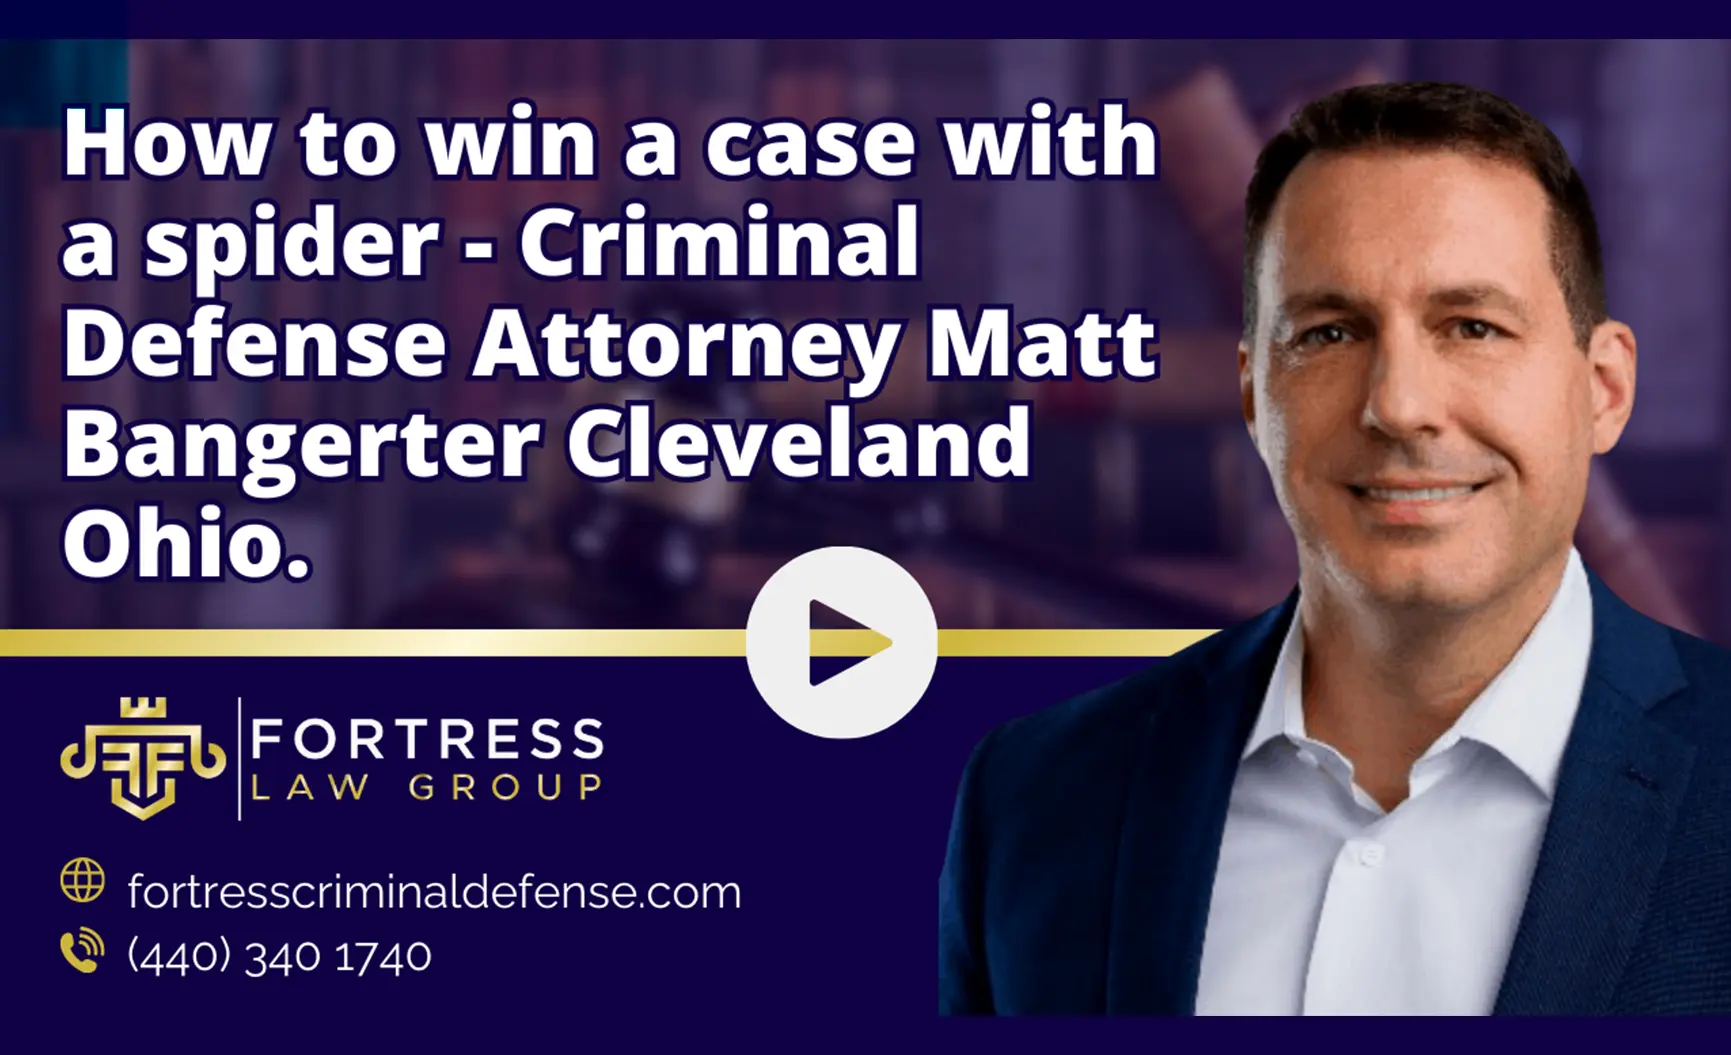 How to Win a Case with a Spider - Criminal Defense Attorney Matt Bangerter Cleveland Ohio.